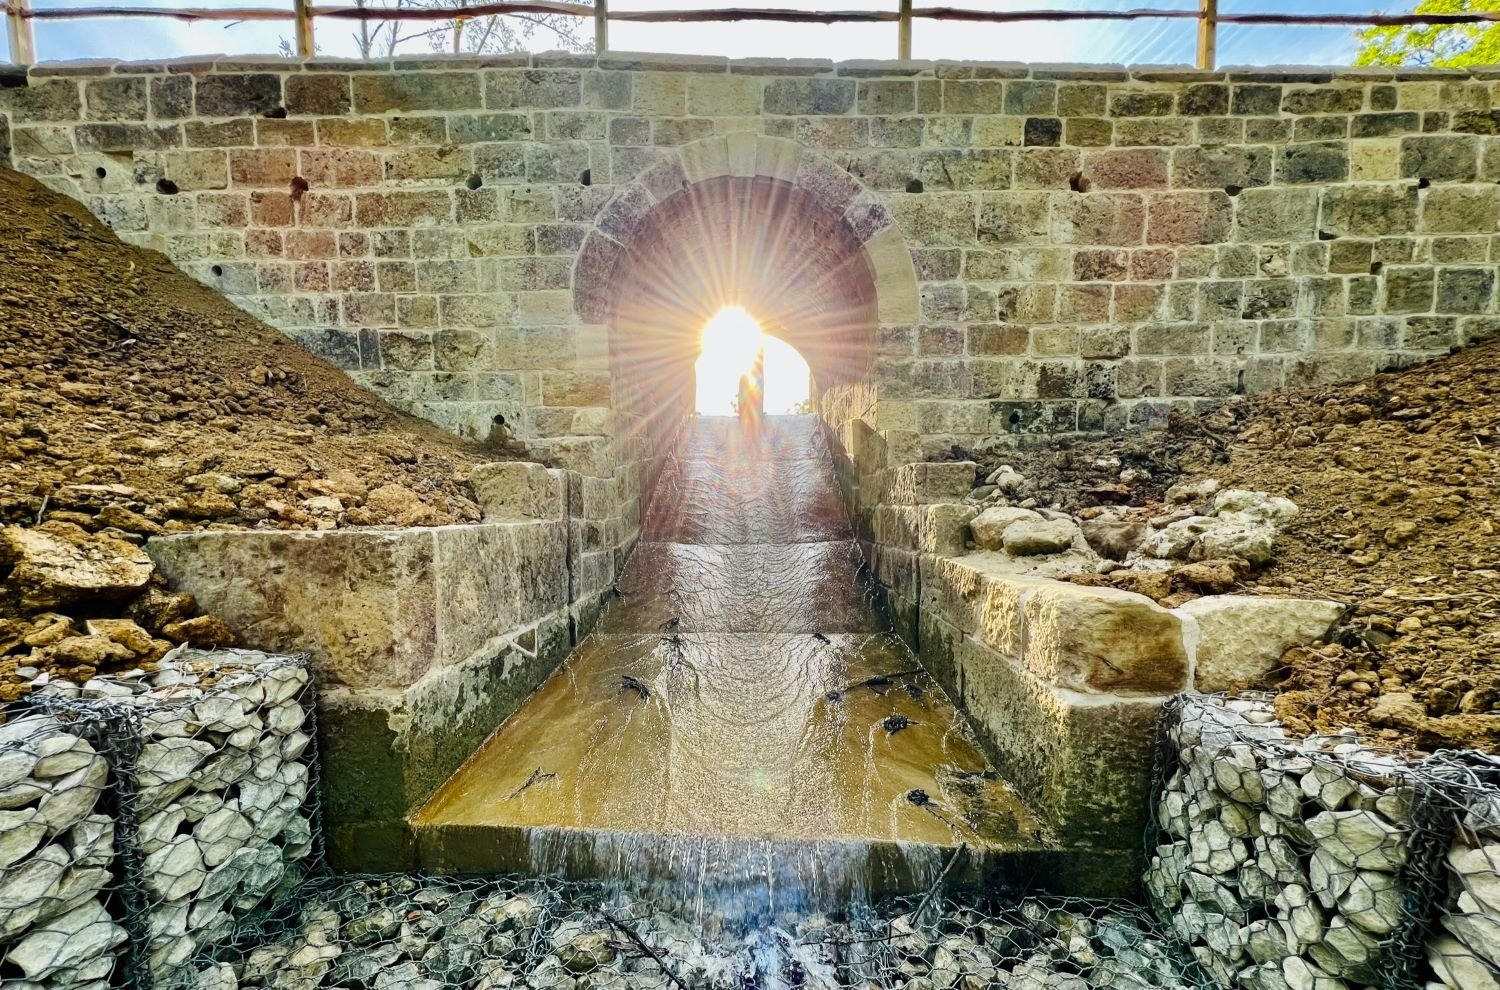 Stone wall with a central archway over a water sluice. The sun is shining through the arch.